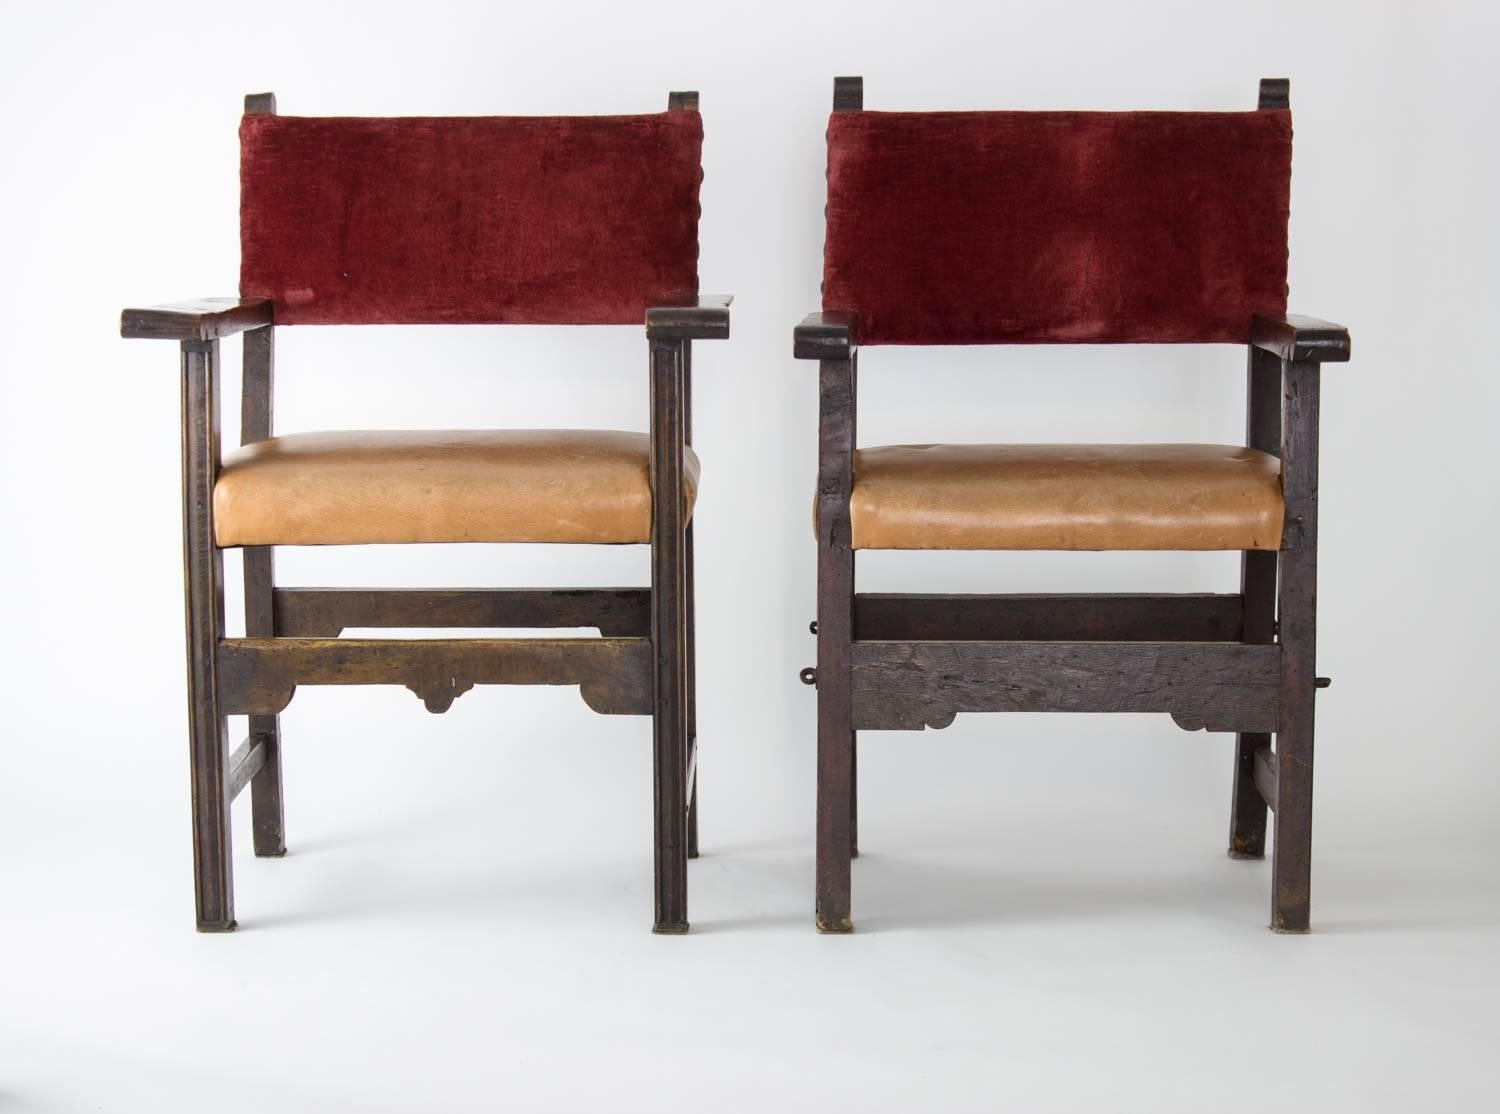 Pair of 18th century English “King and Queen” chairs, restored with reupholstery in 1997; original crest retained.